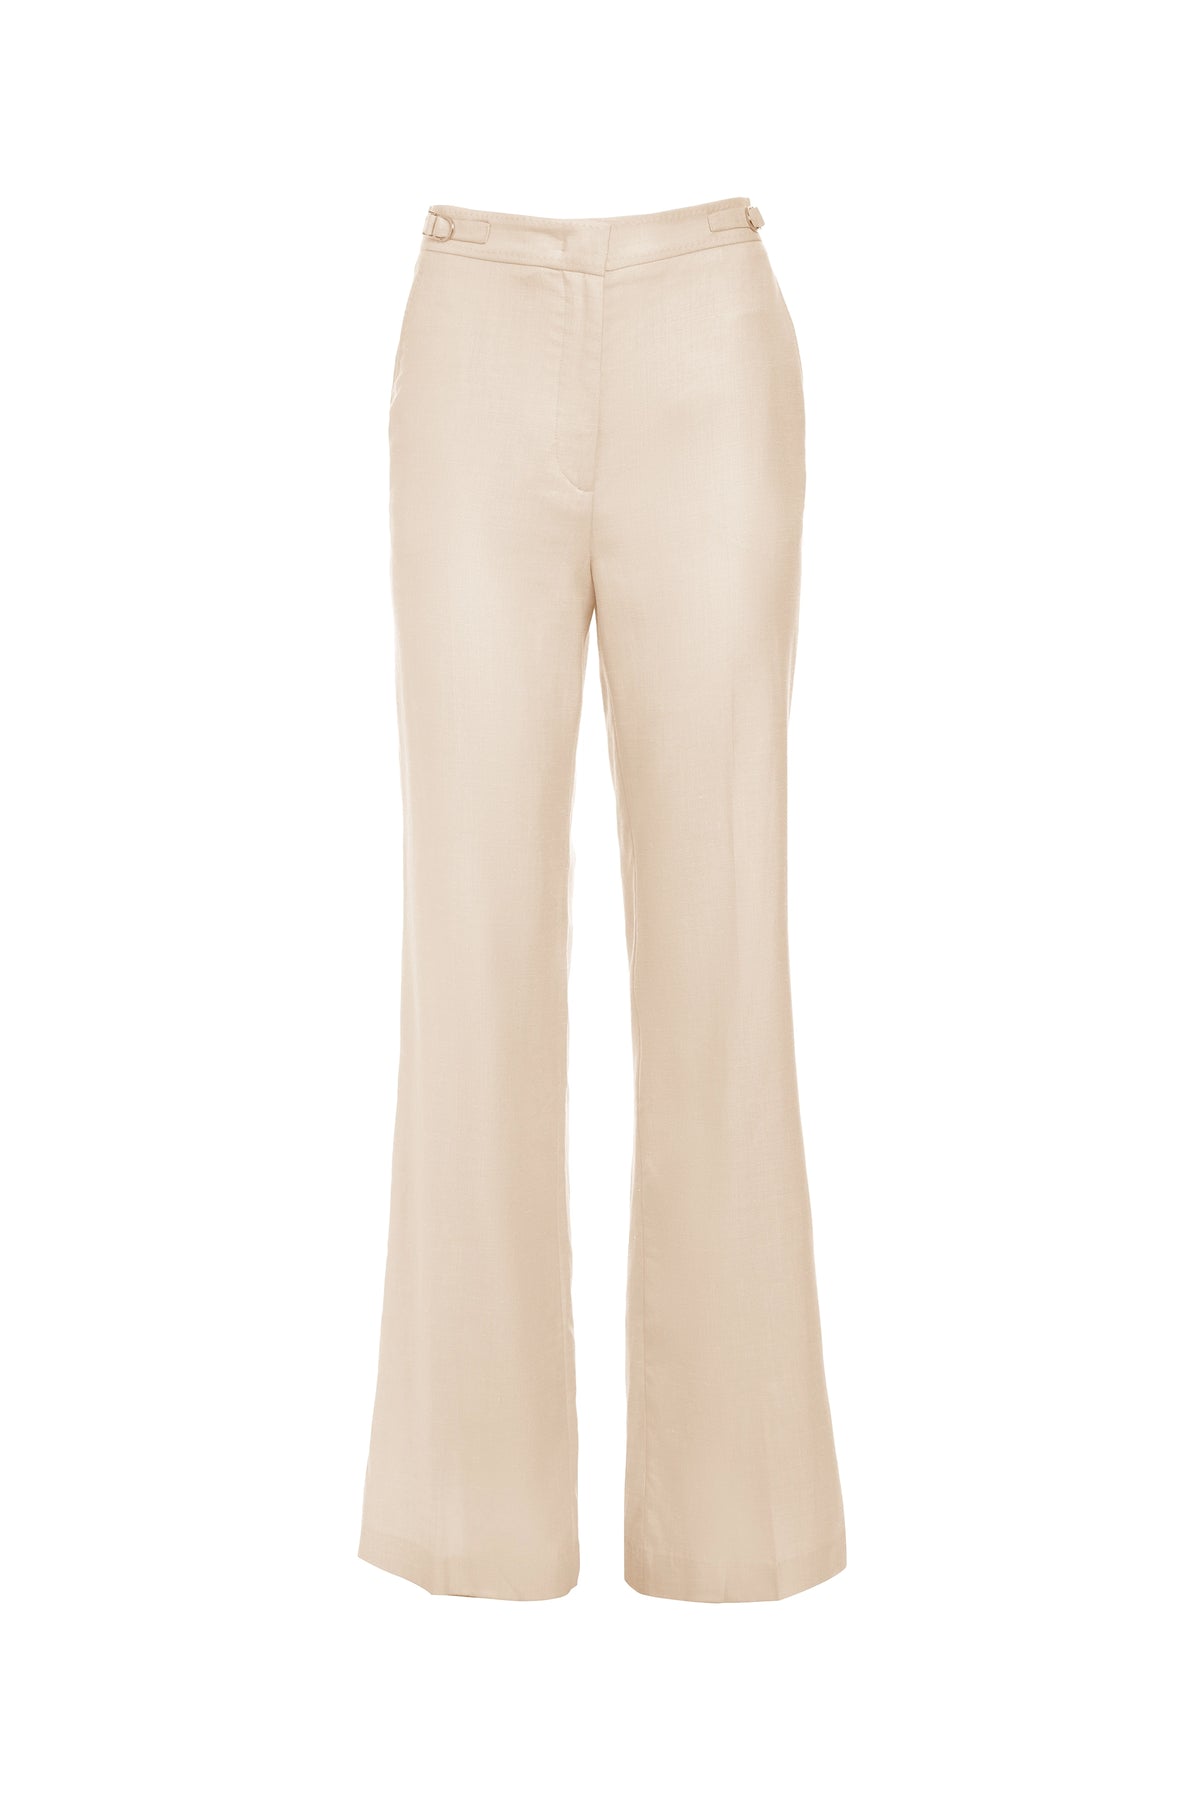 Vesta Pant in Oatmeal Silk Wool with Linen